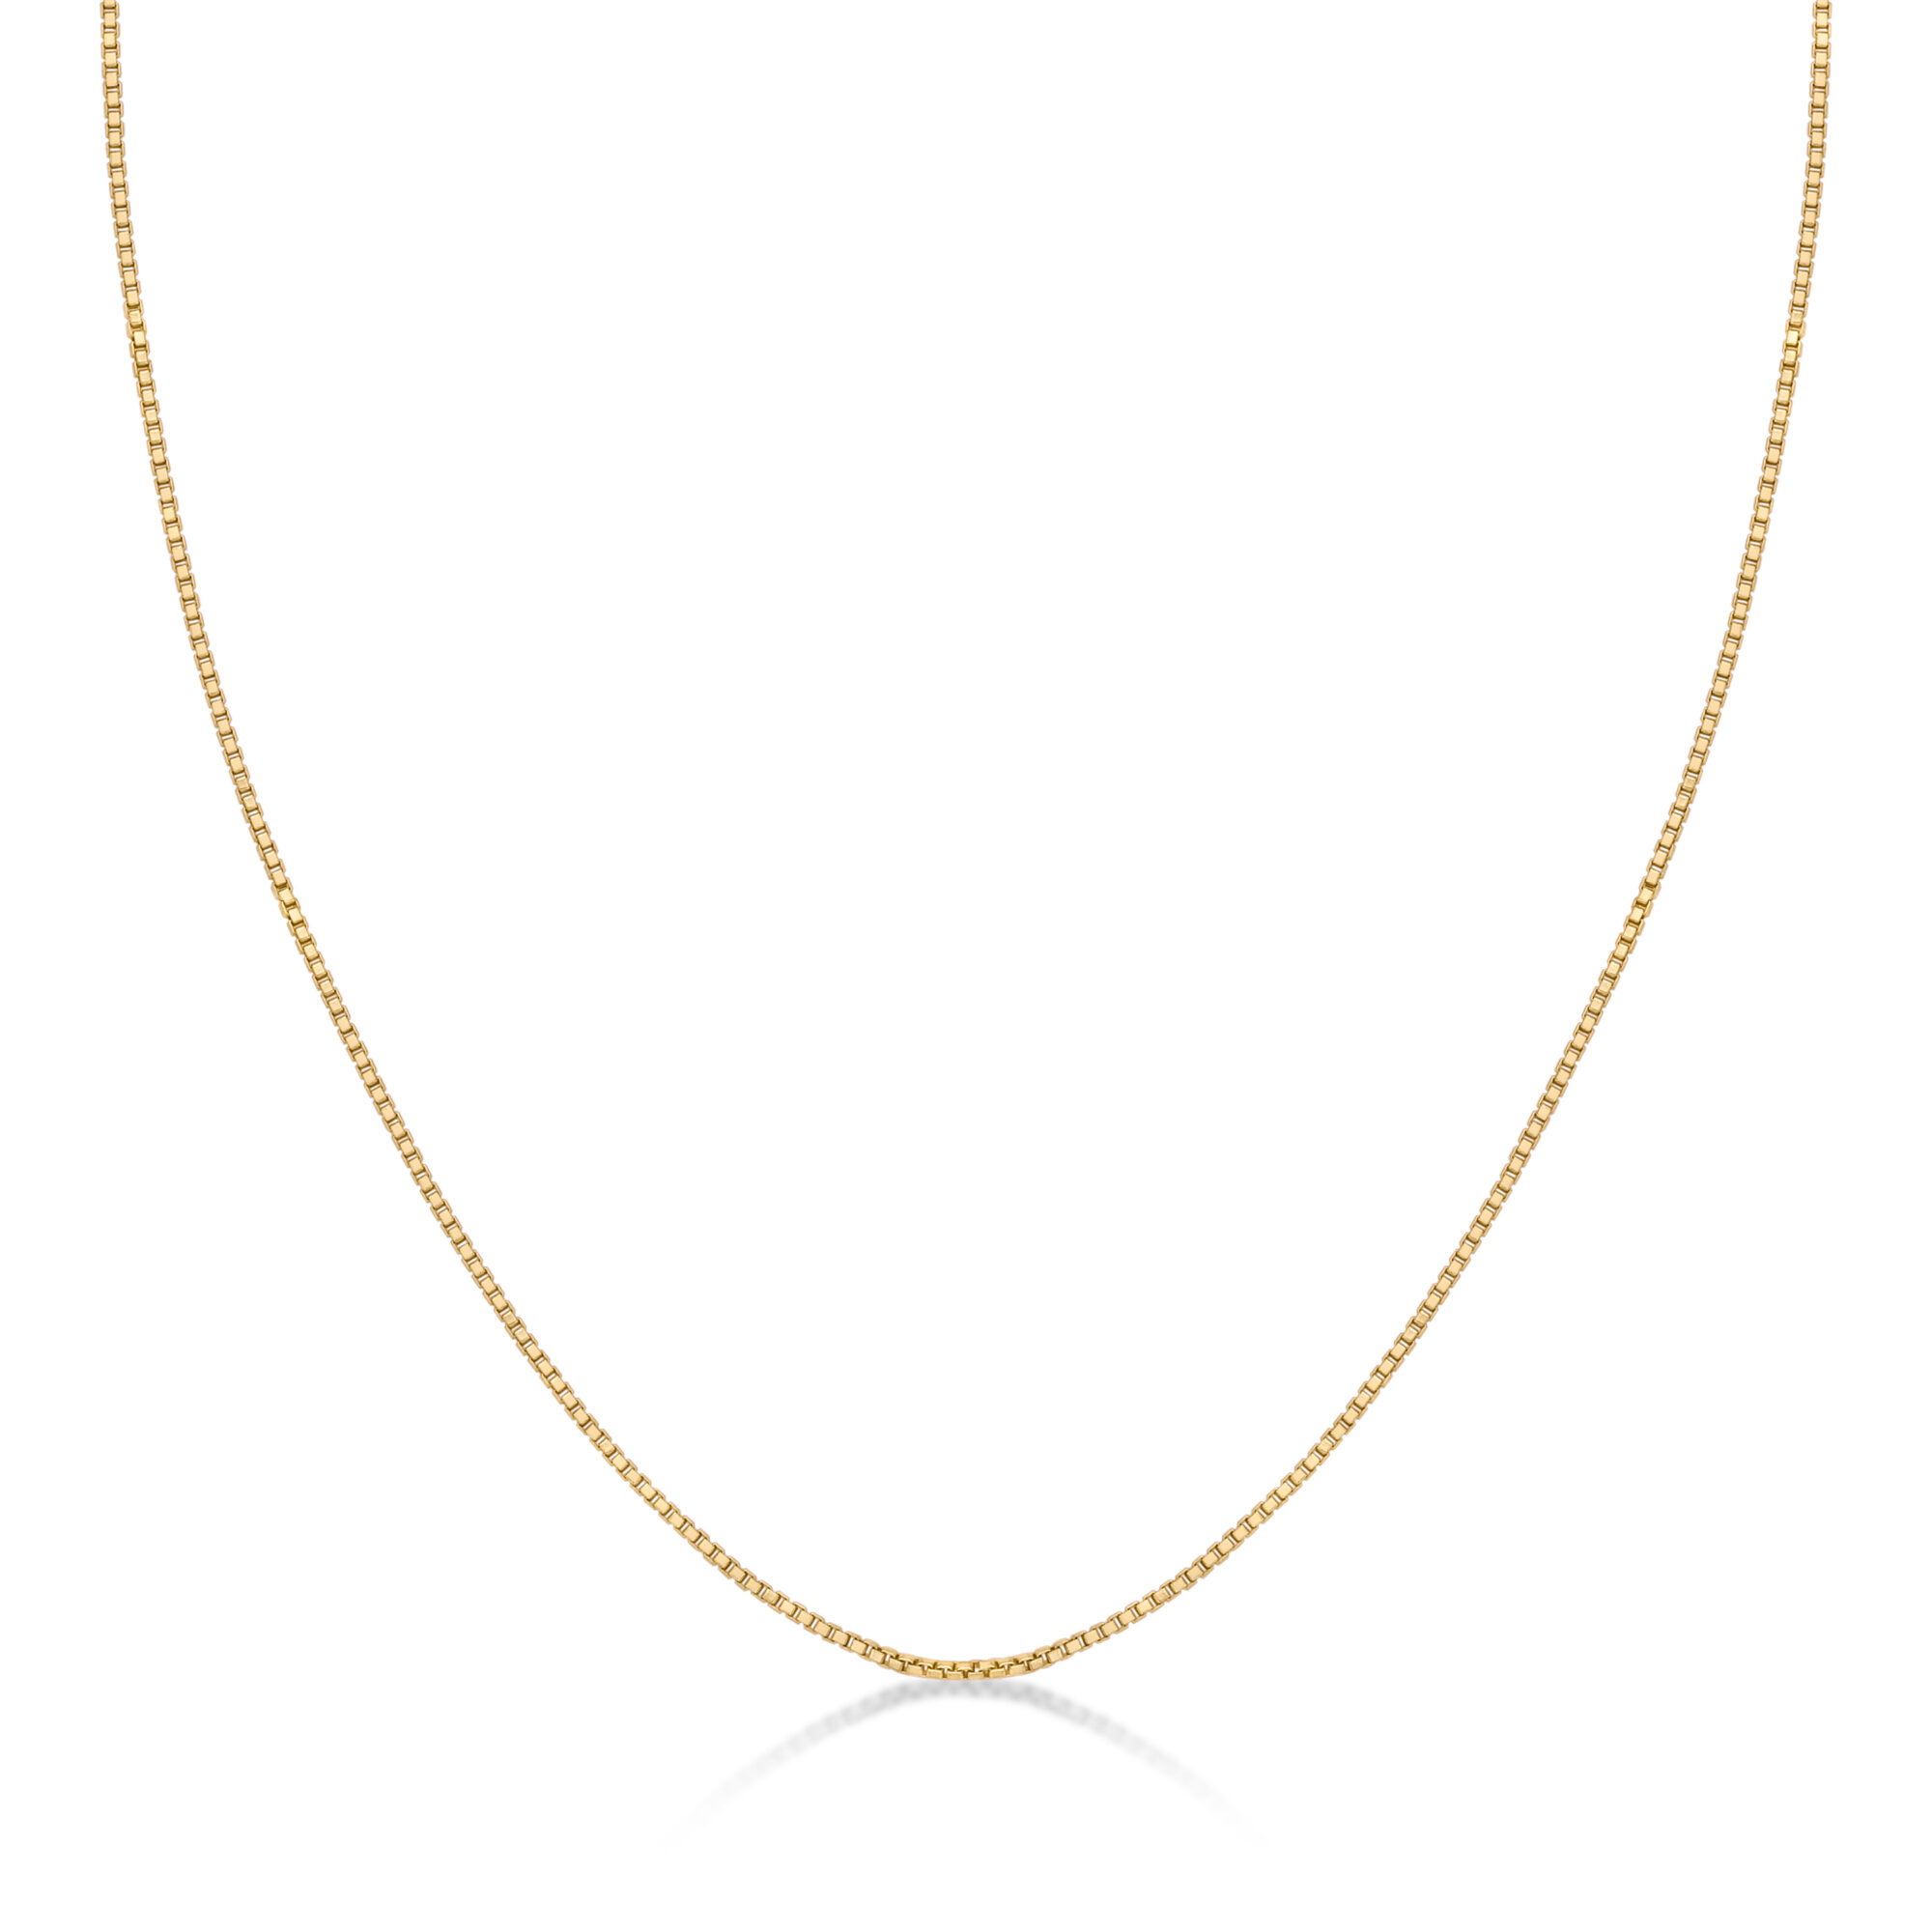 Lavari Jewelers Women's Replacement Chain with Spring Ring Clasp, 14K Yellow Gold, 0.6 MM Box Chain, 18 Inch